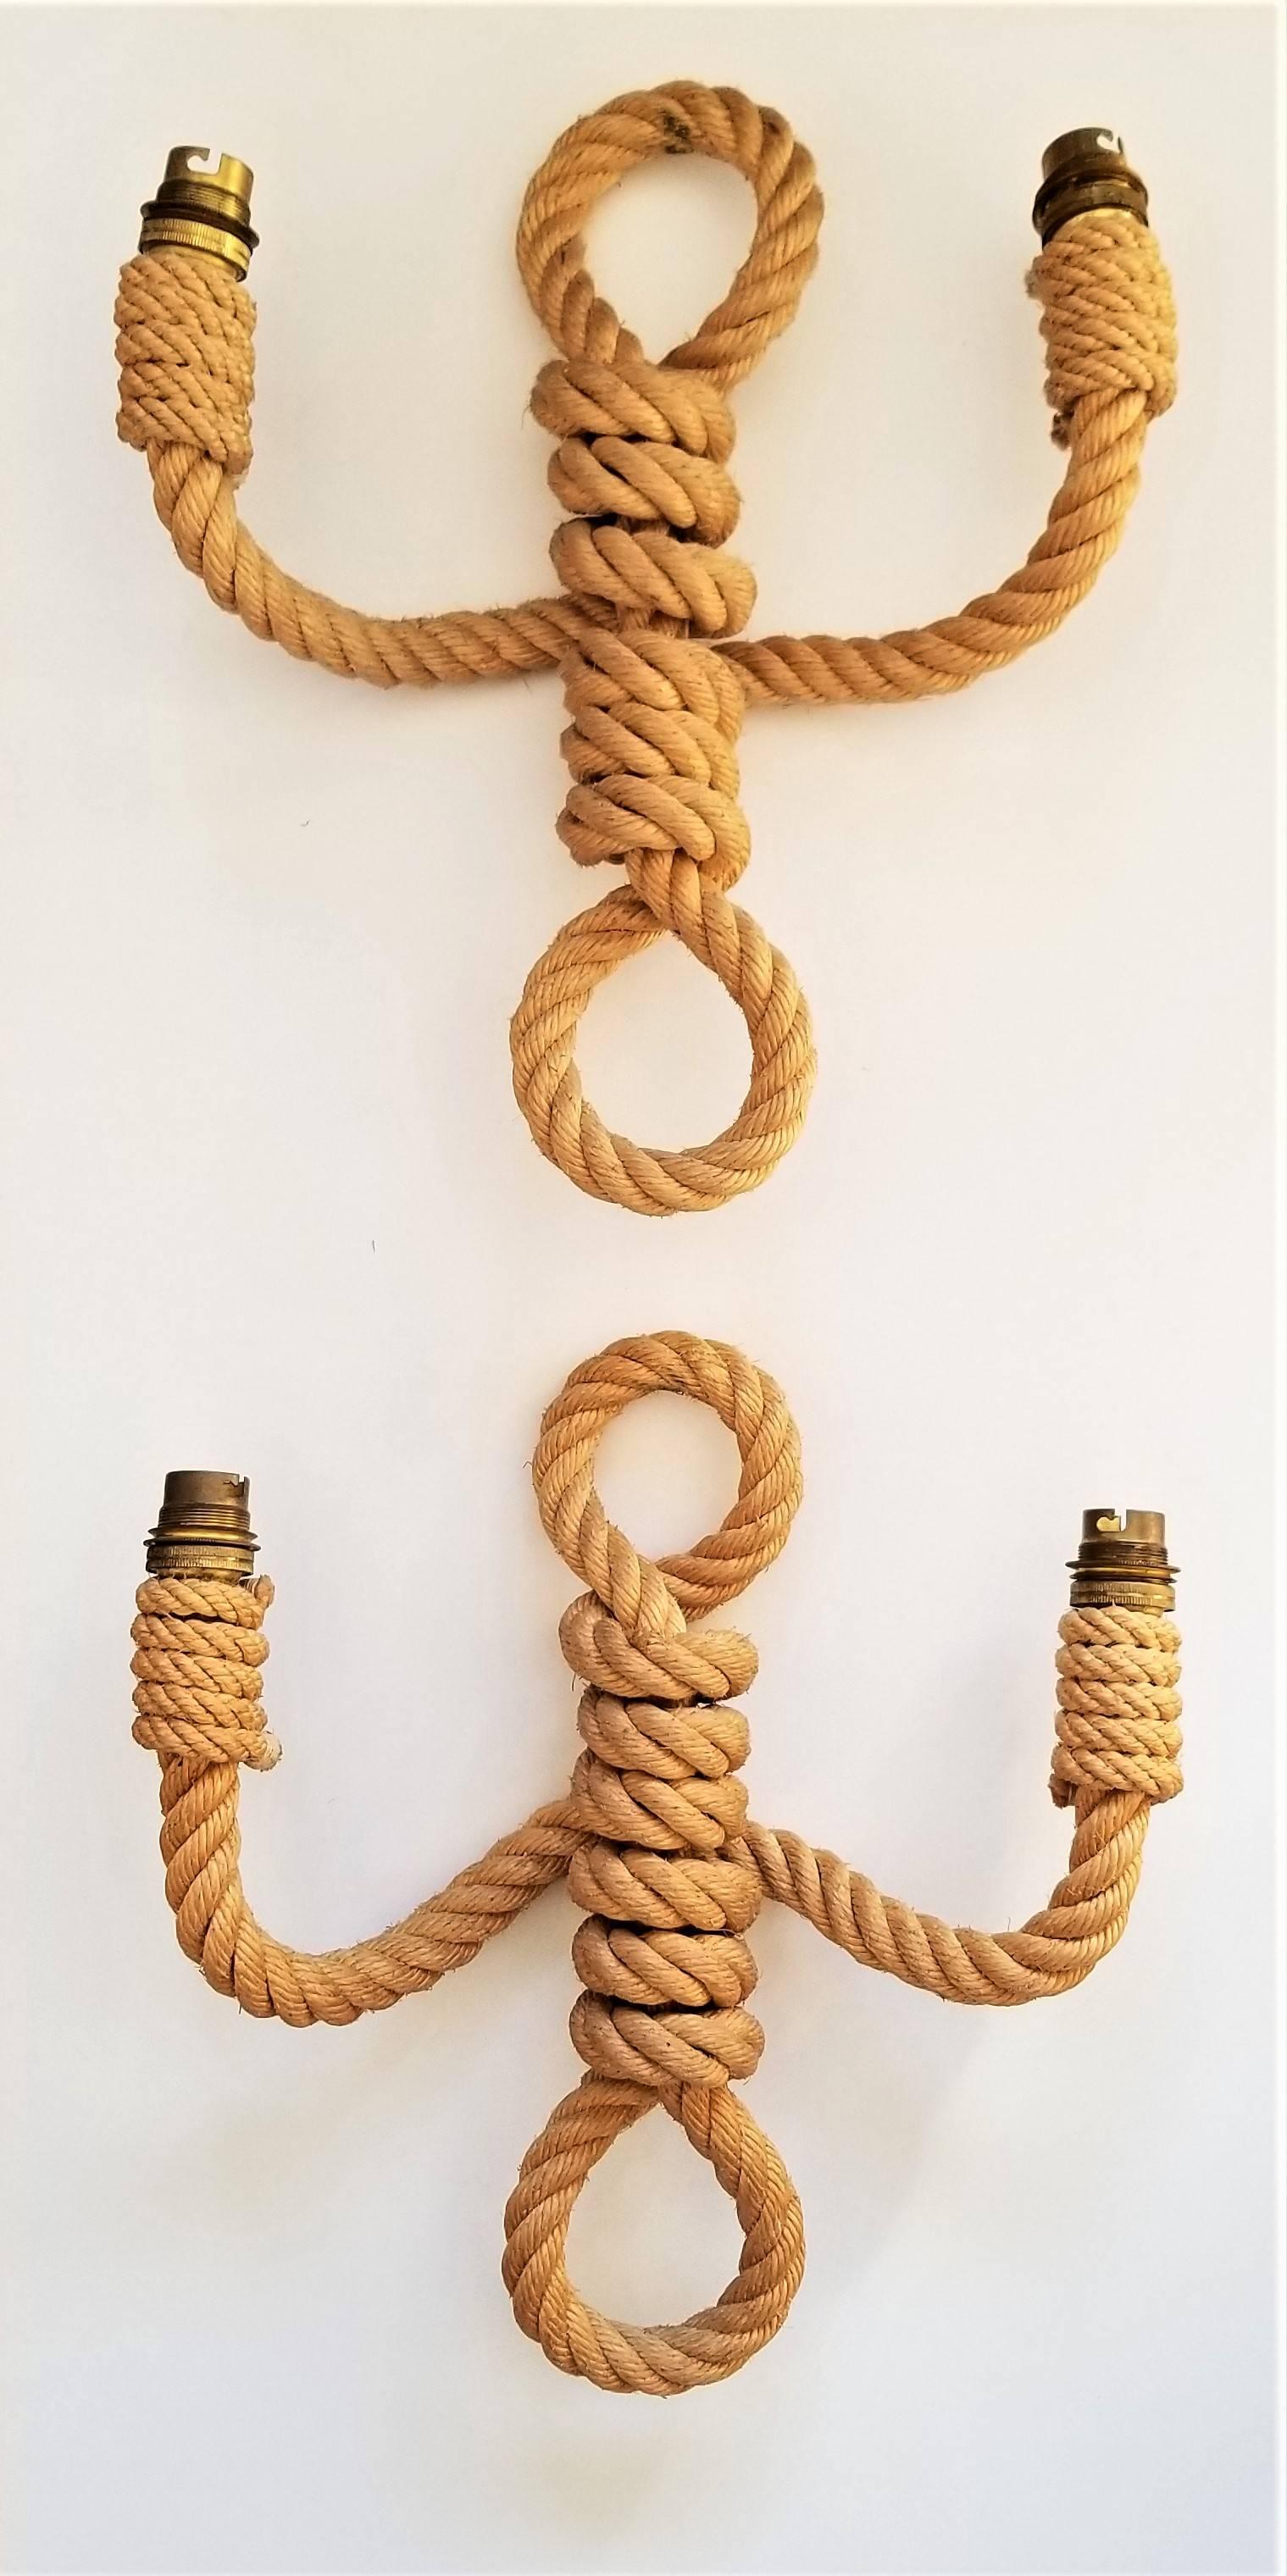 Rope sconces by Audoux Minnet, Golfe Juan France
arms are flexible and can be adjsuted in length and height
European sockets and wiring
